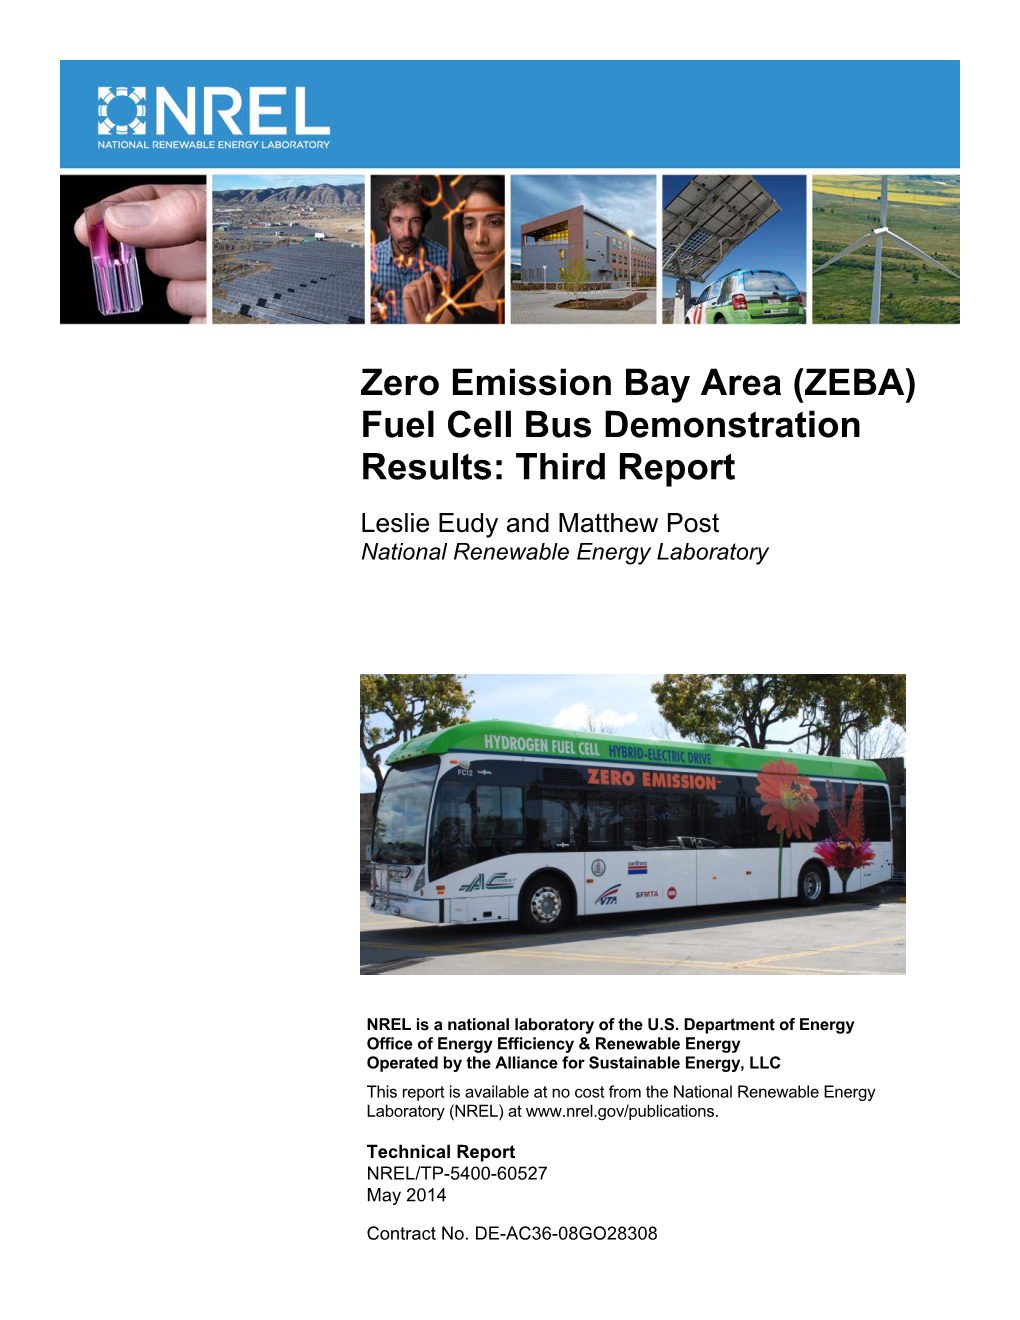 Zero Emission Bay Area (ZEBA) Fuel Cell Bus Demonstration Results: Third Report Leslie Eudy and Matthew Post National Renewable Energy Laboratory